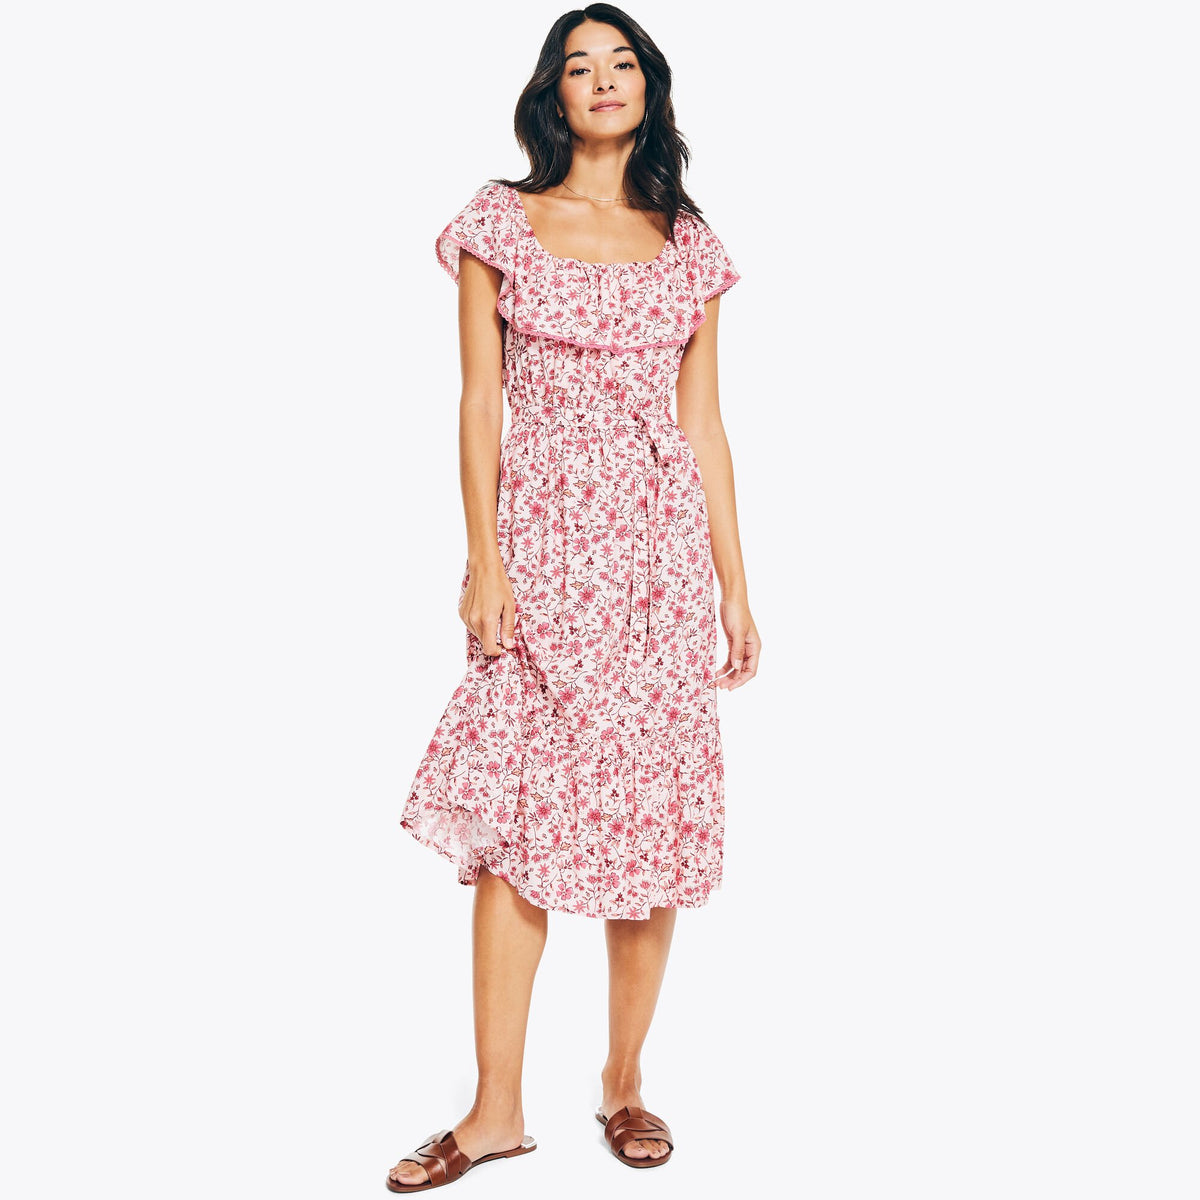 Nautica Women's Sustainably Crafted Floral Printed Dress Flare Red